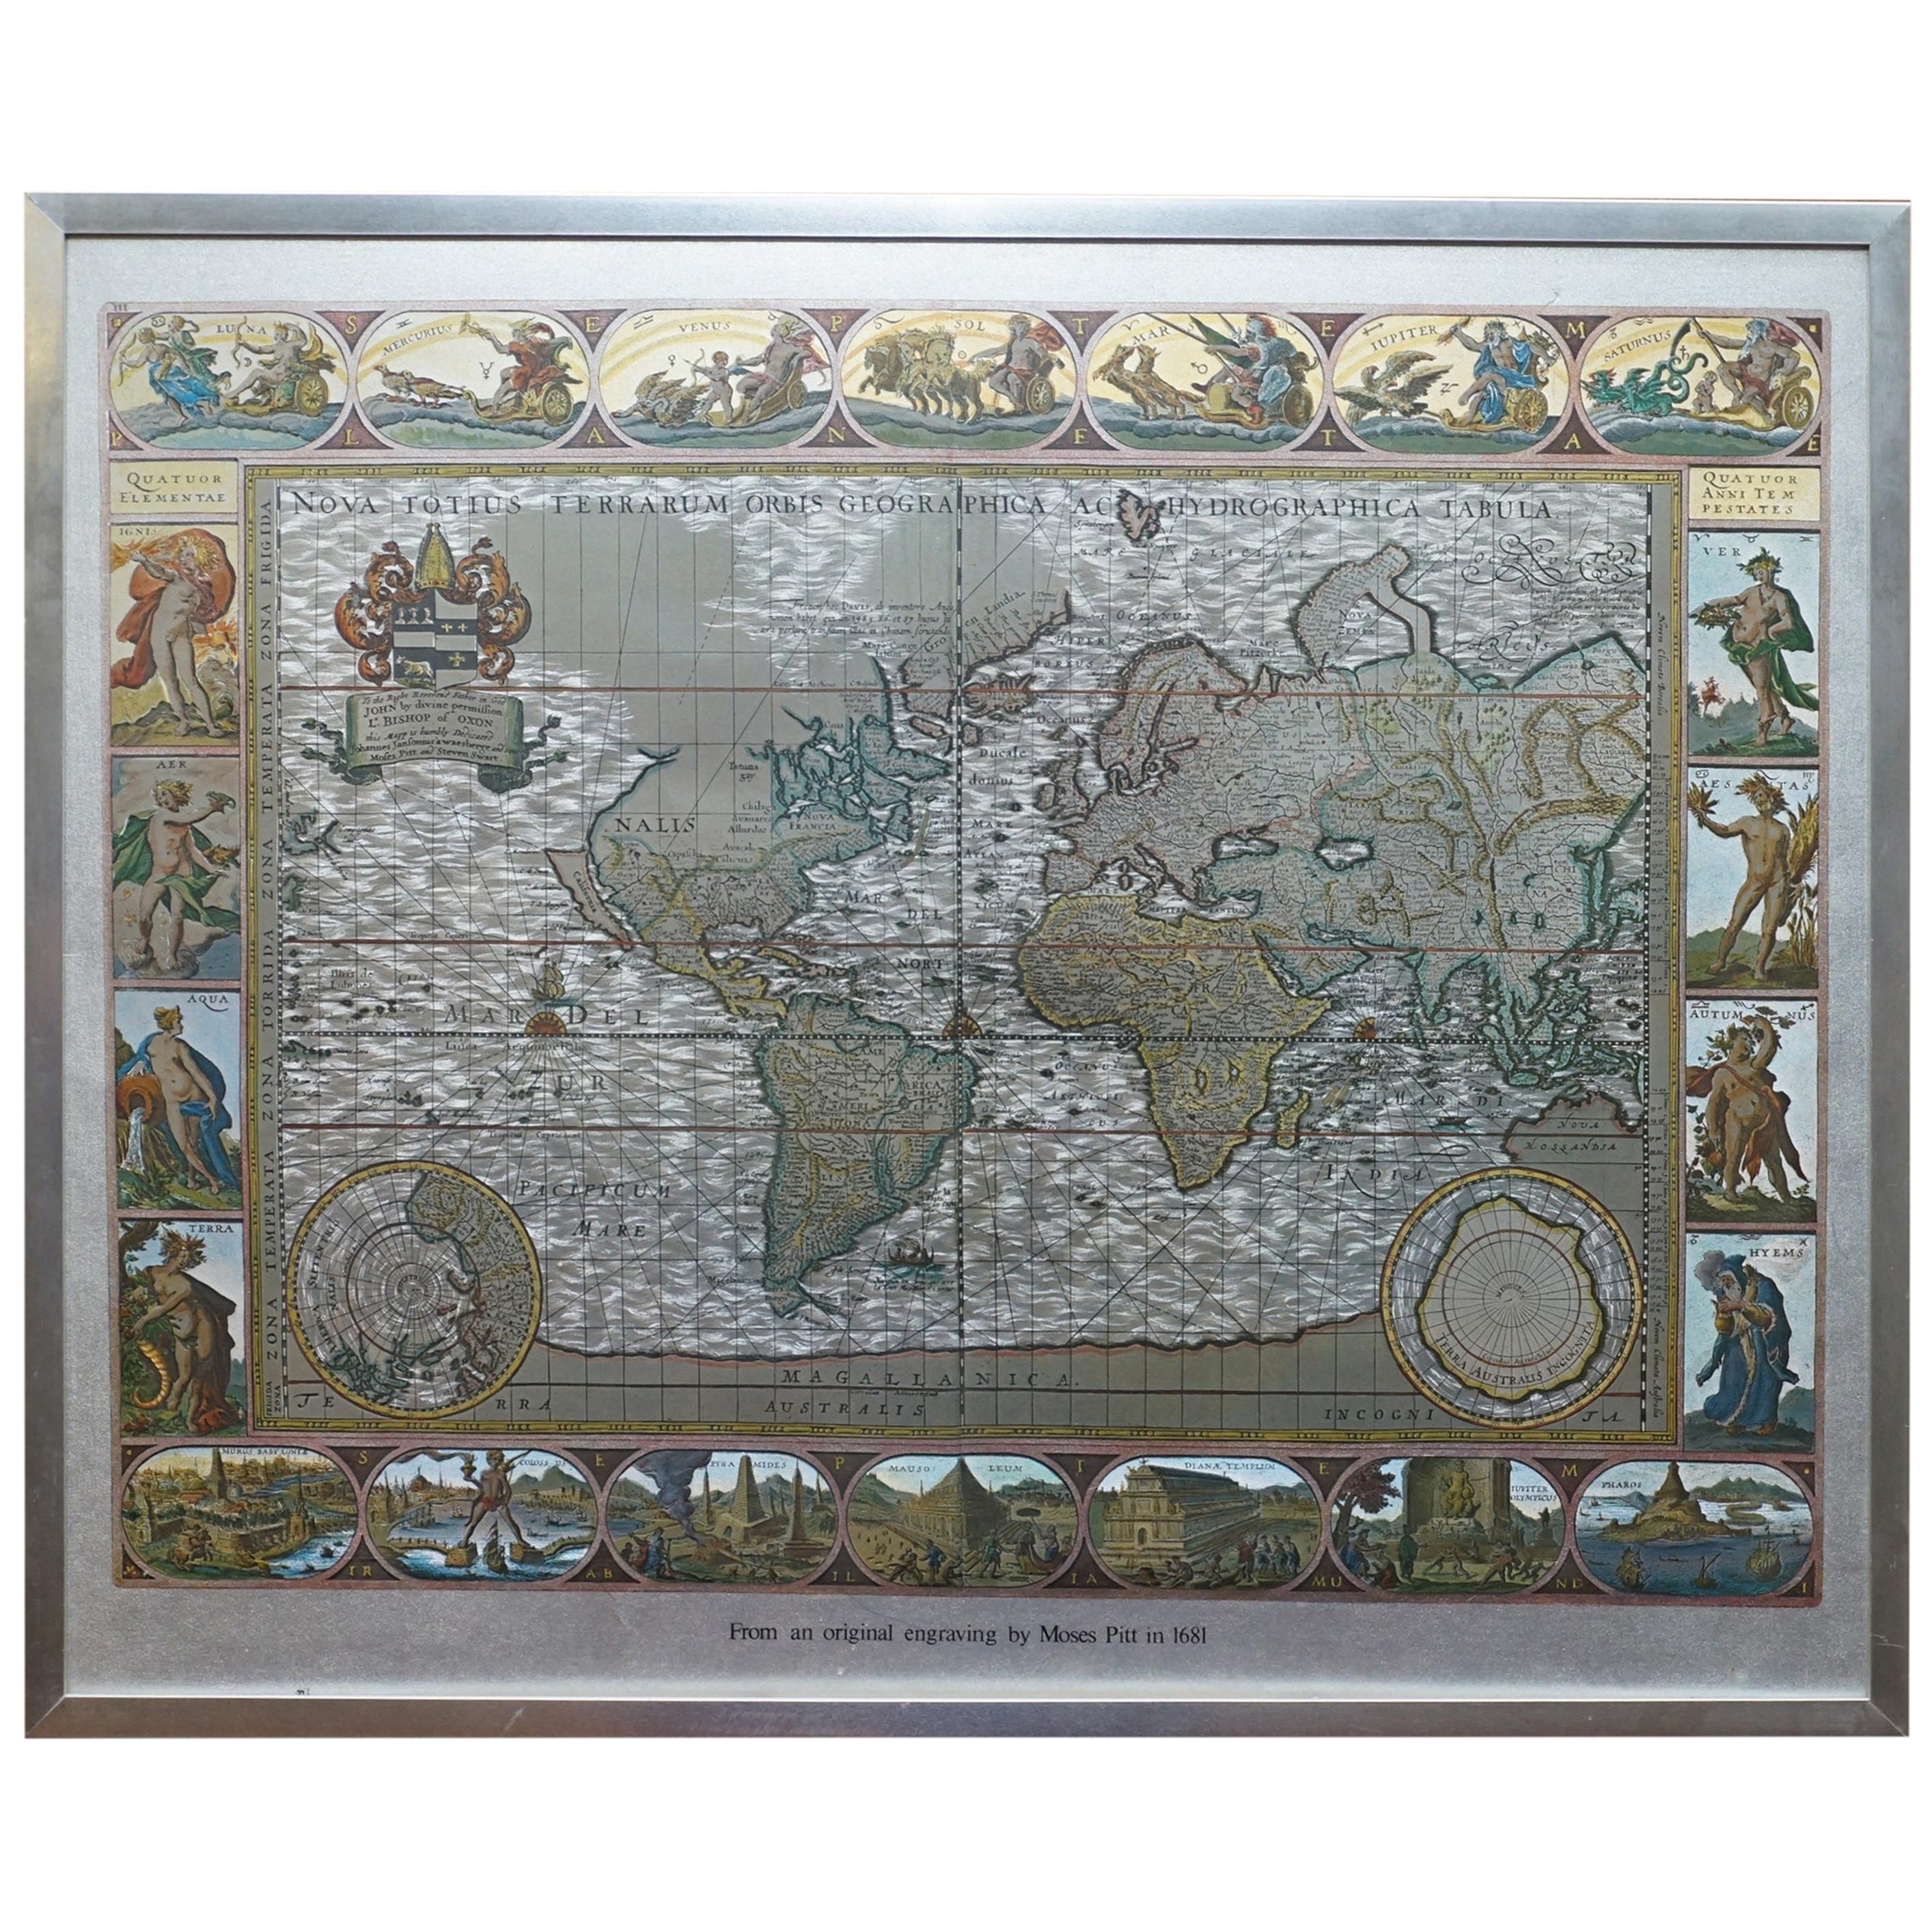 Silver Leaf Foil Wall World Map Engraving Based on the Original Moses Pitt, 1681 For Sale